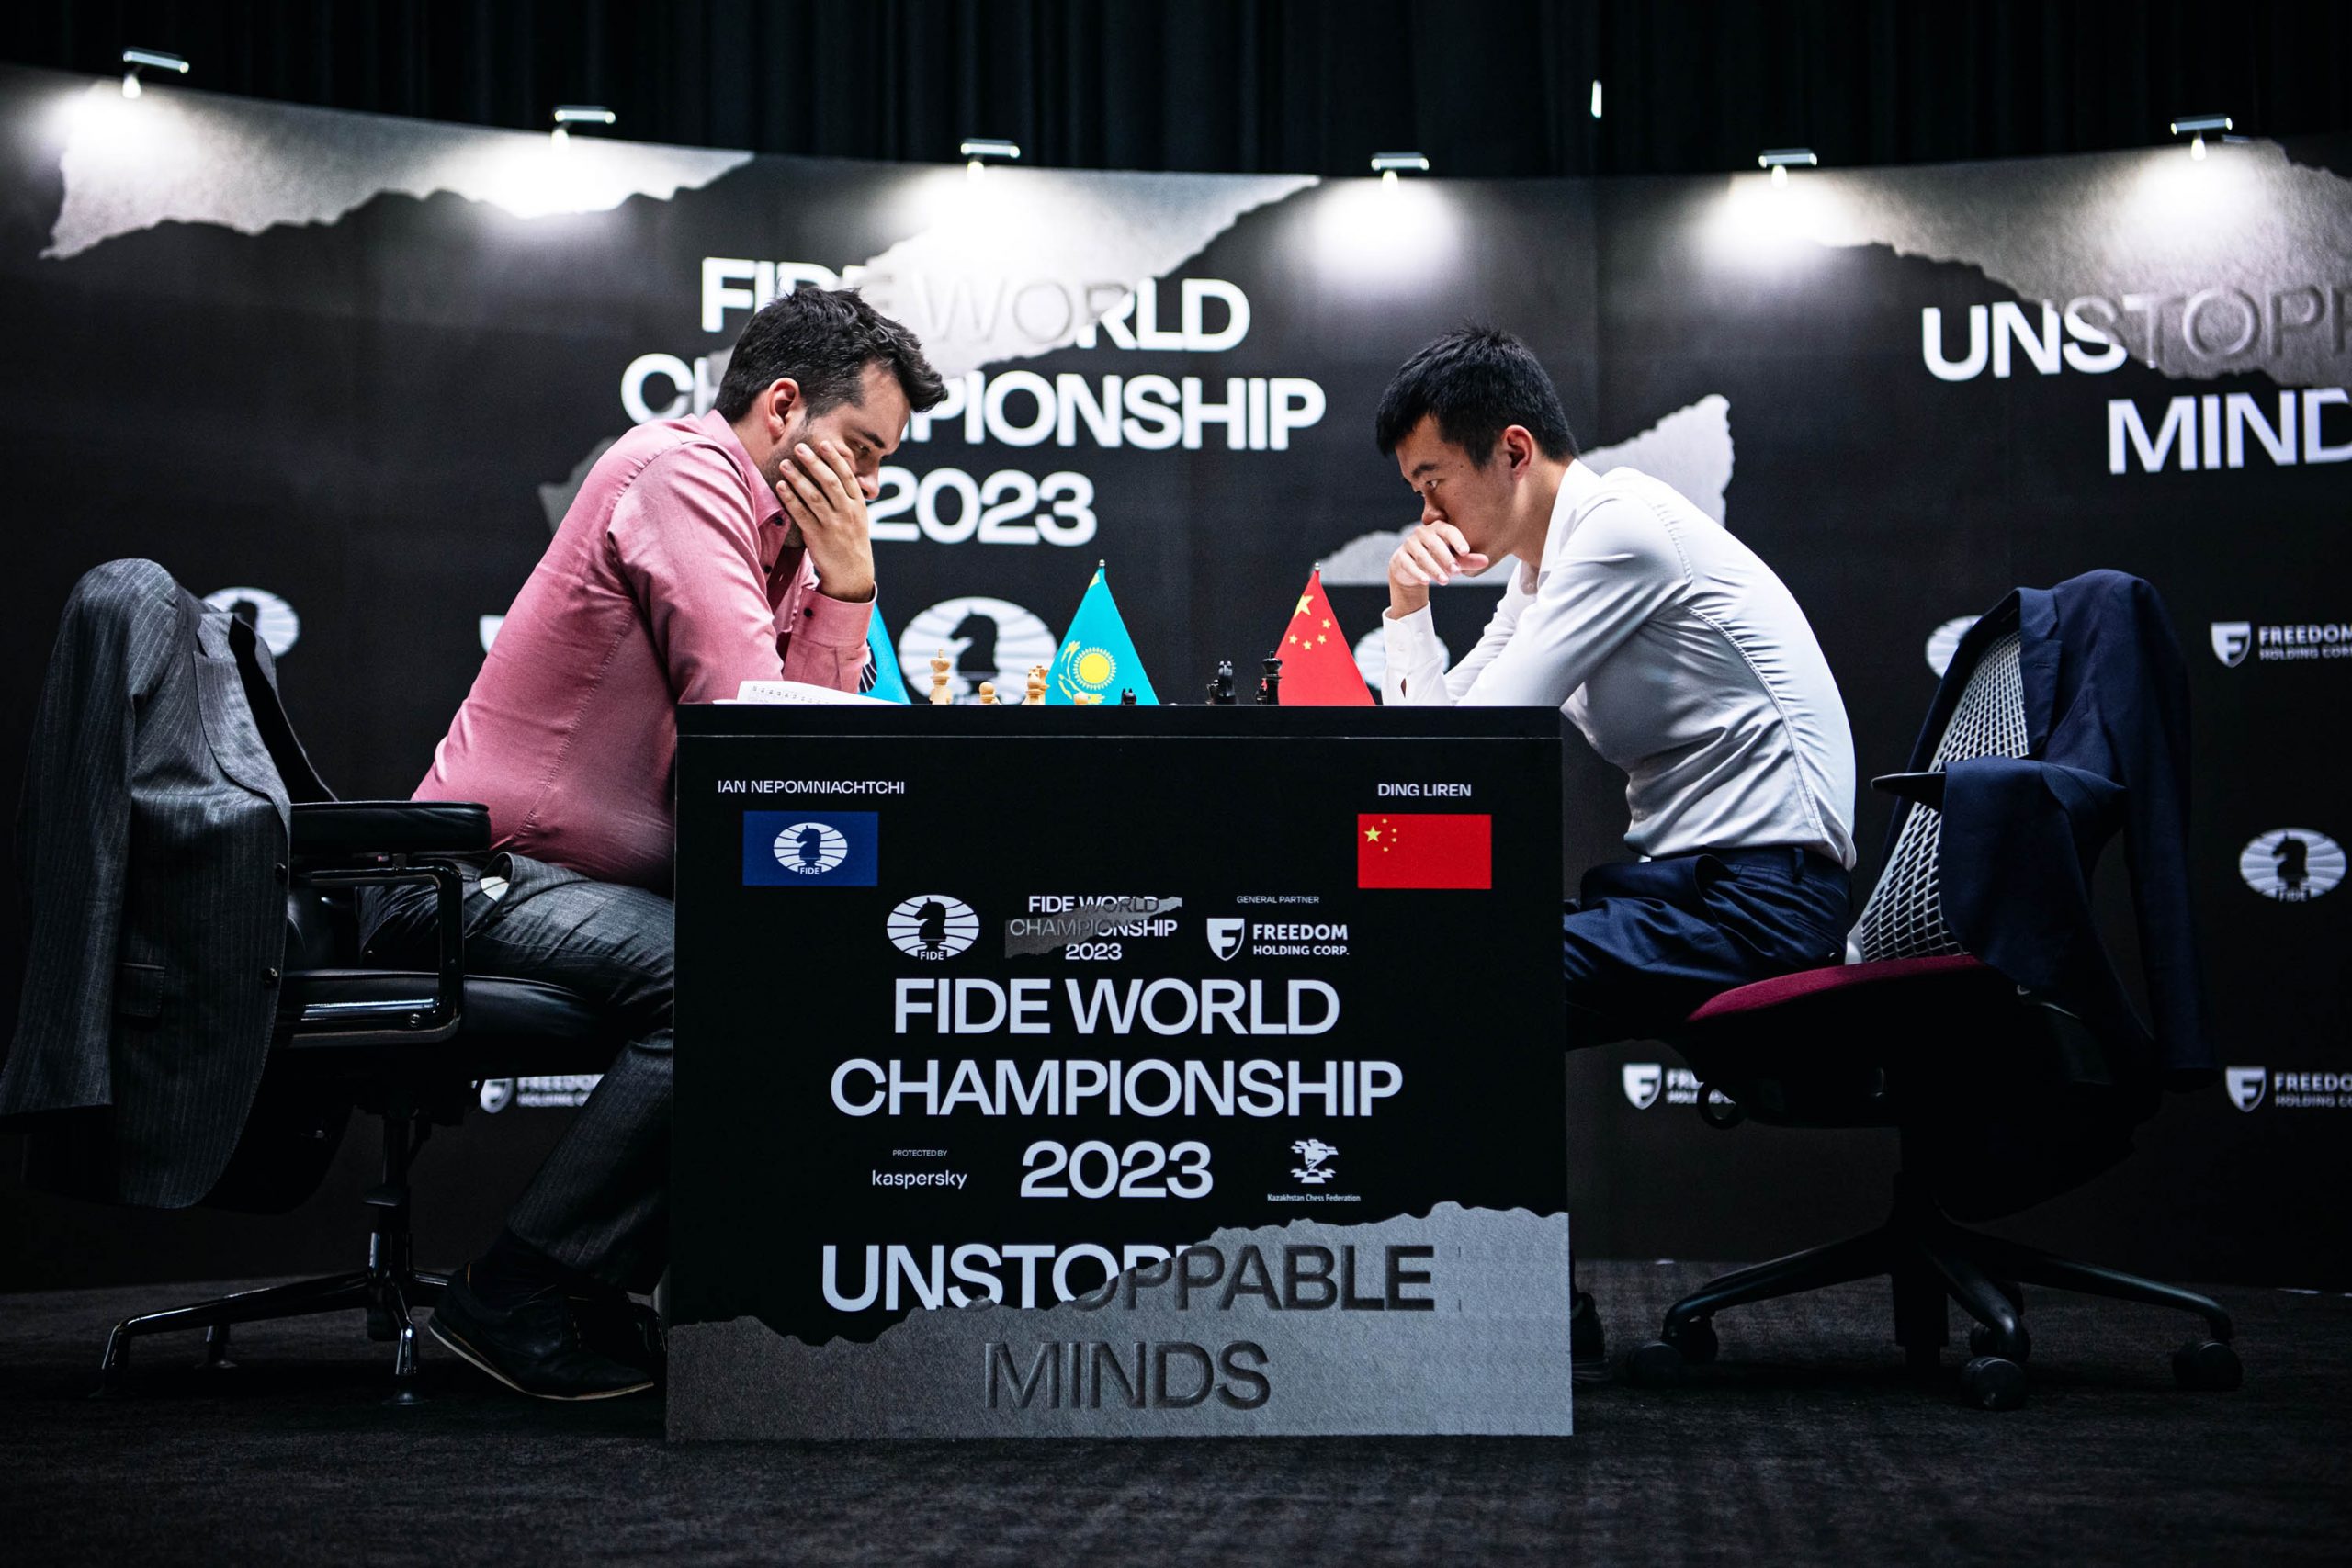 Ding Liren collapses under time pressure as Ian Nepomniachtchi regains world  championship lead